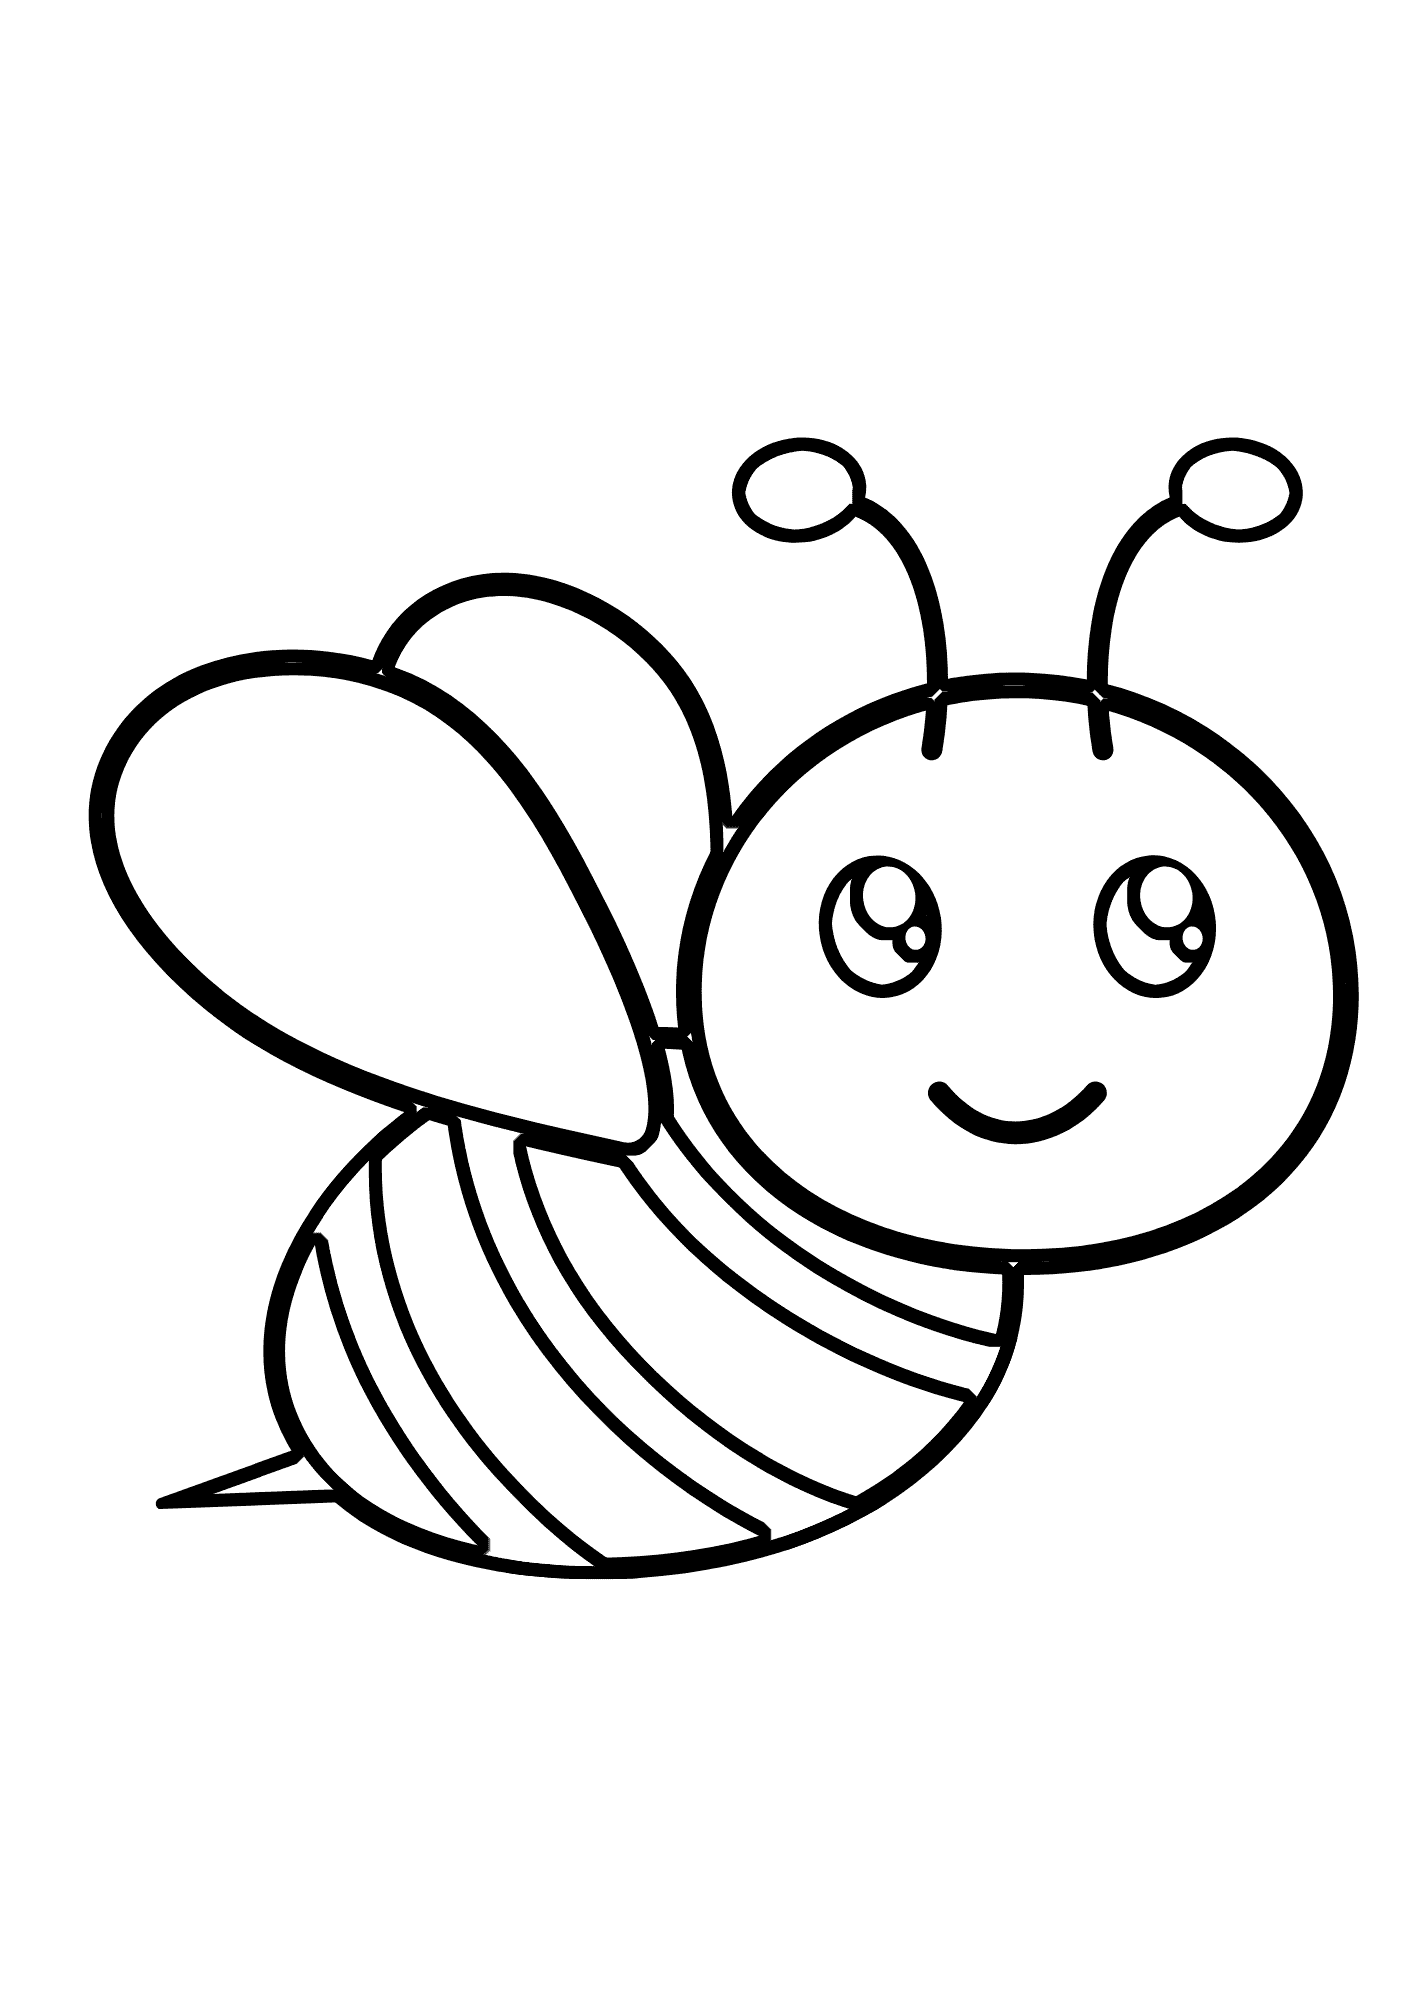 Bbumble Bee Coloring Pages